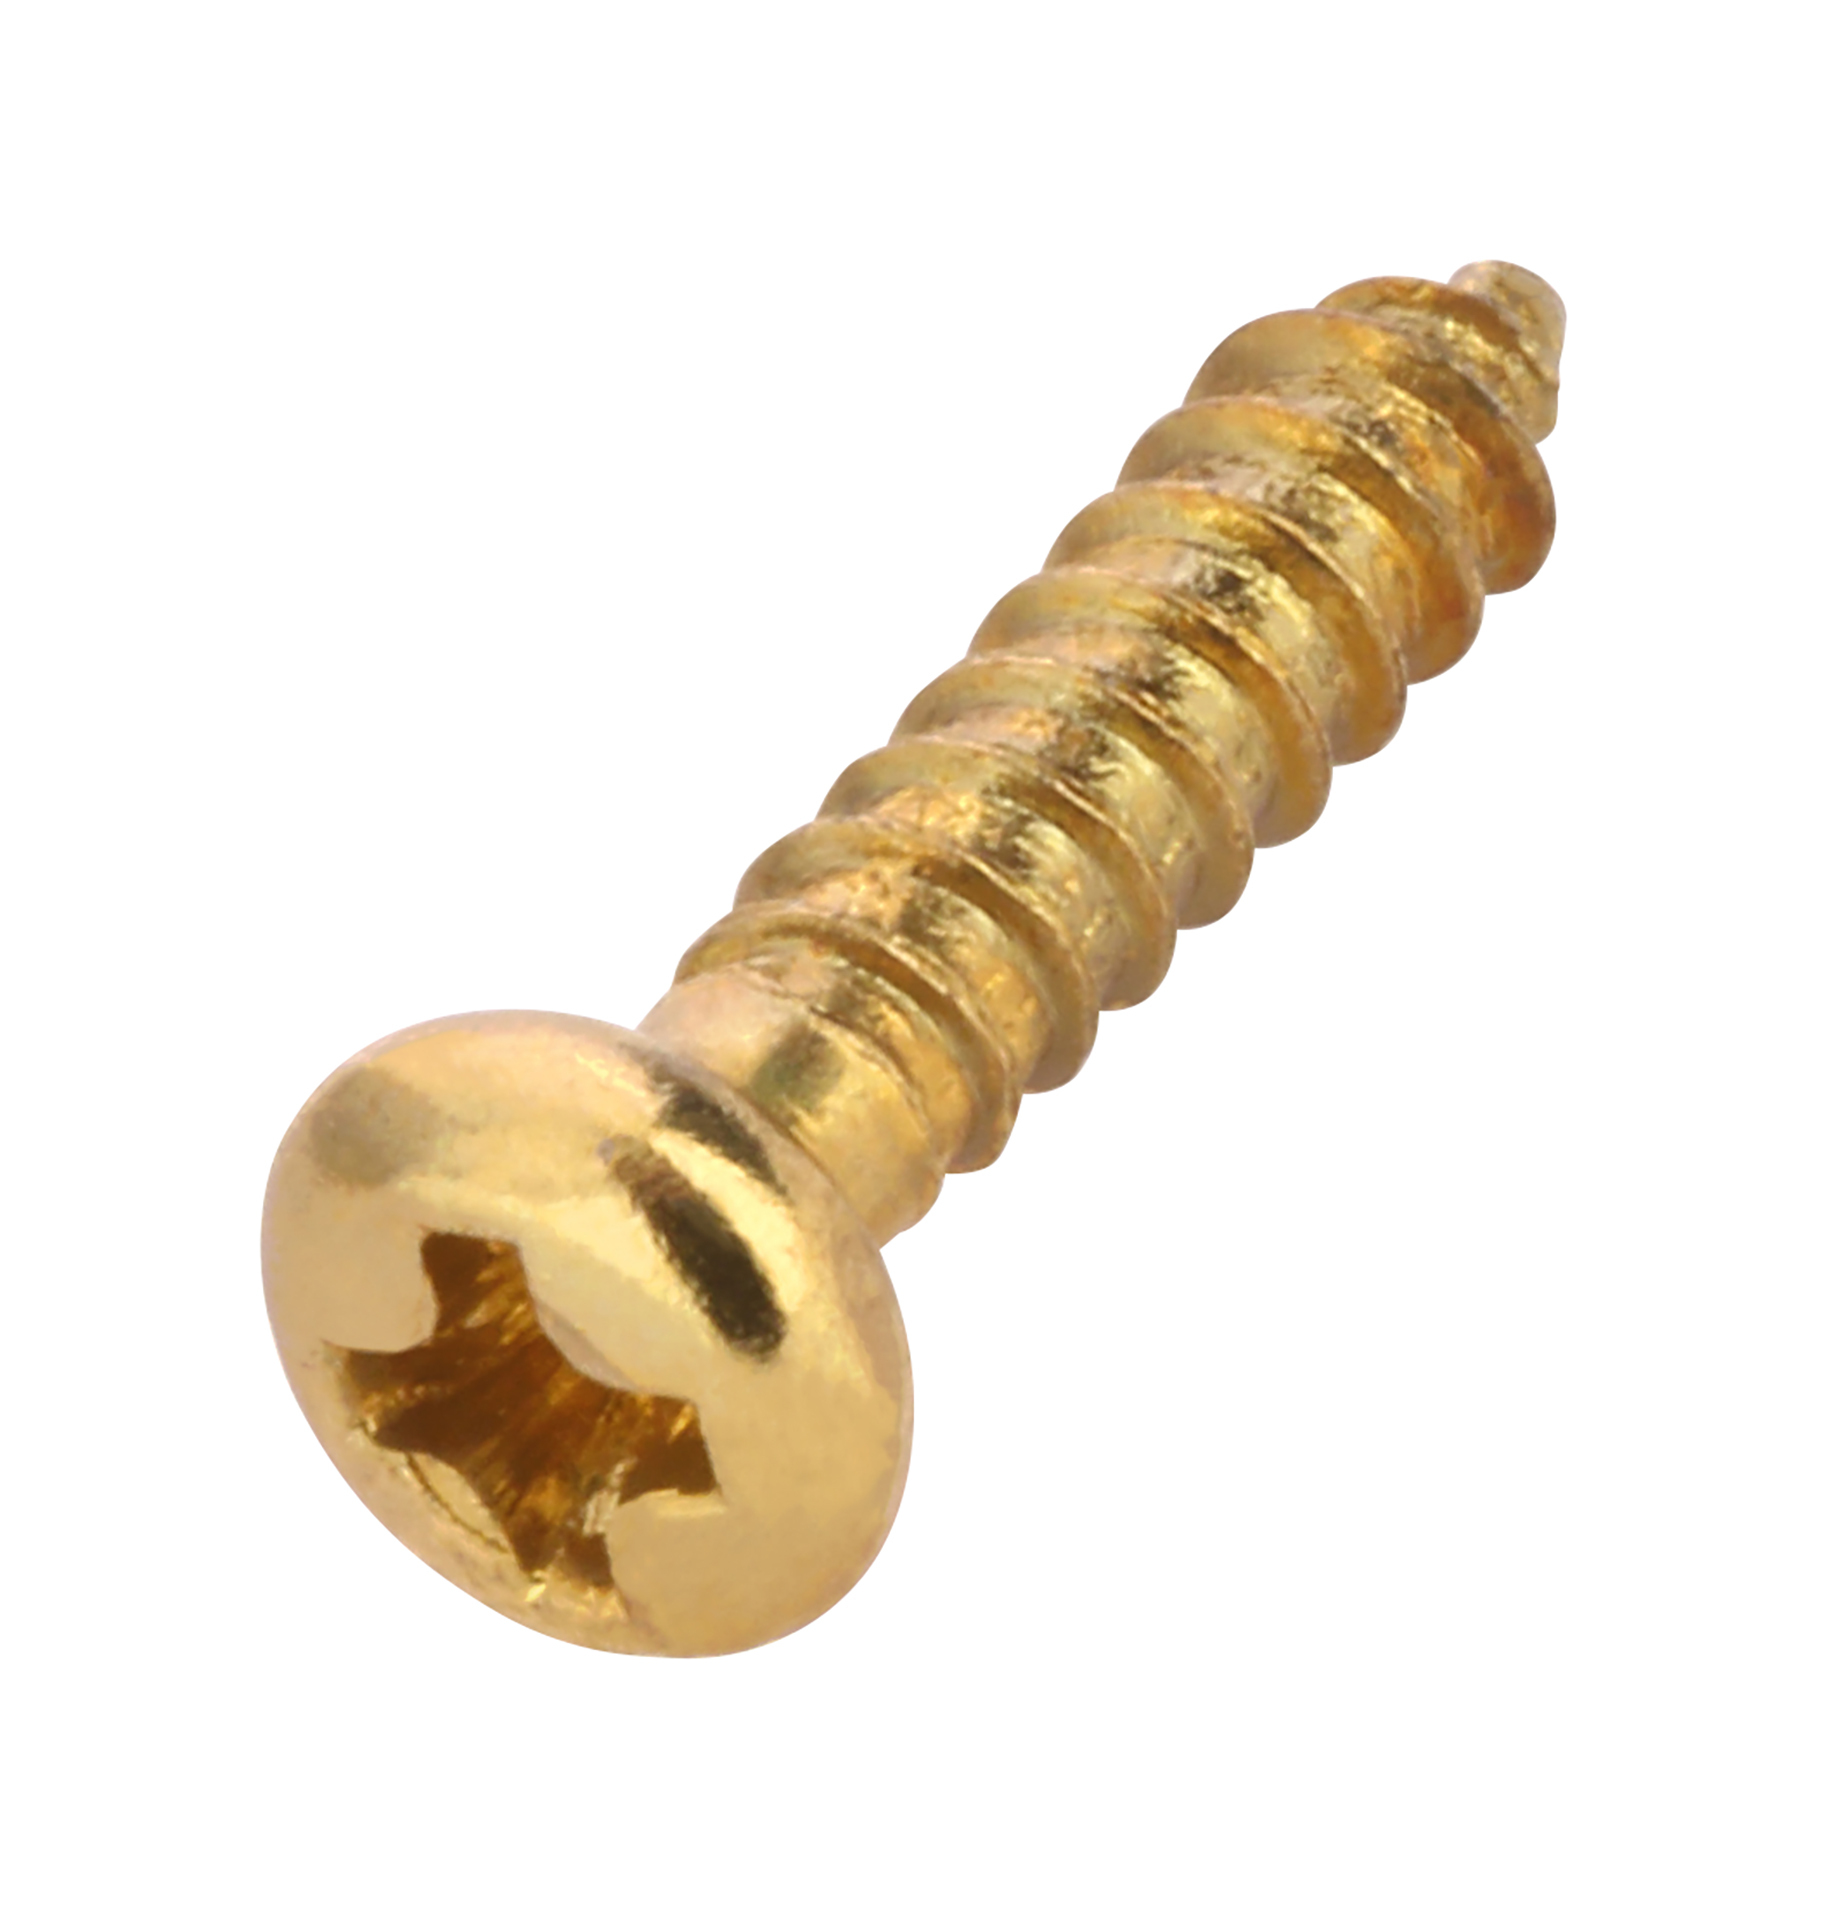 Grover Spare Parts - Wood Screw for Machine Heads - Gold